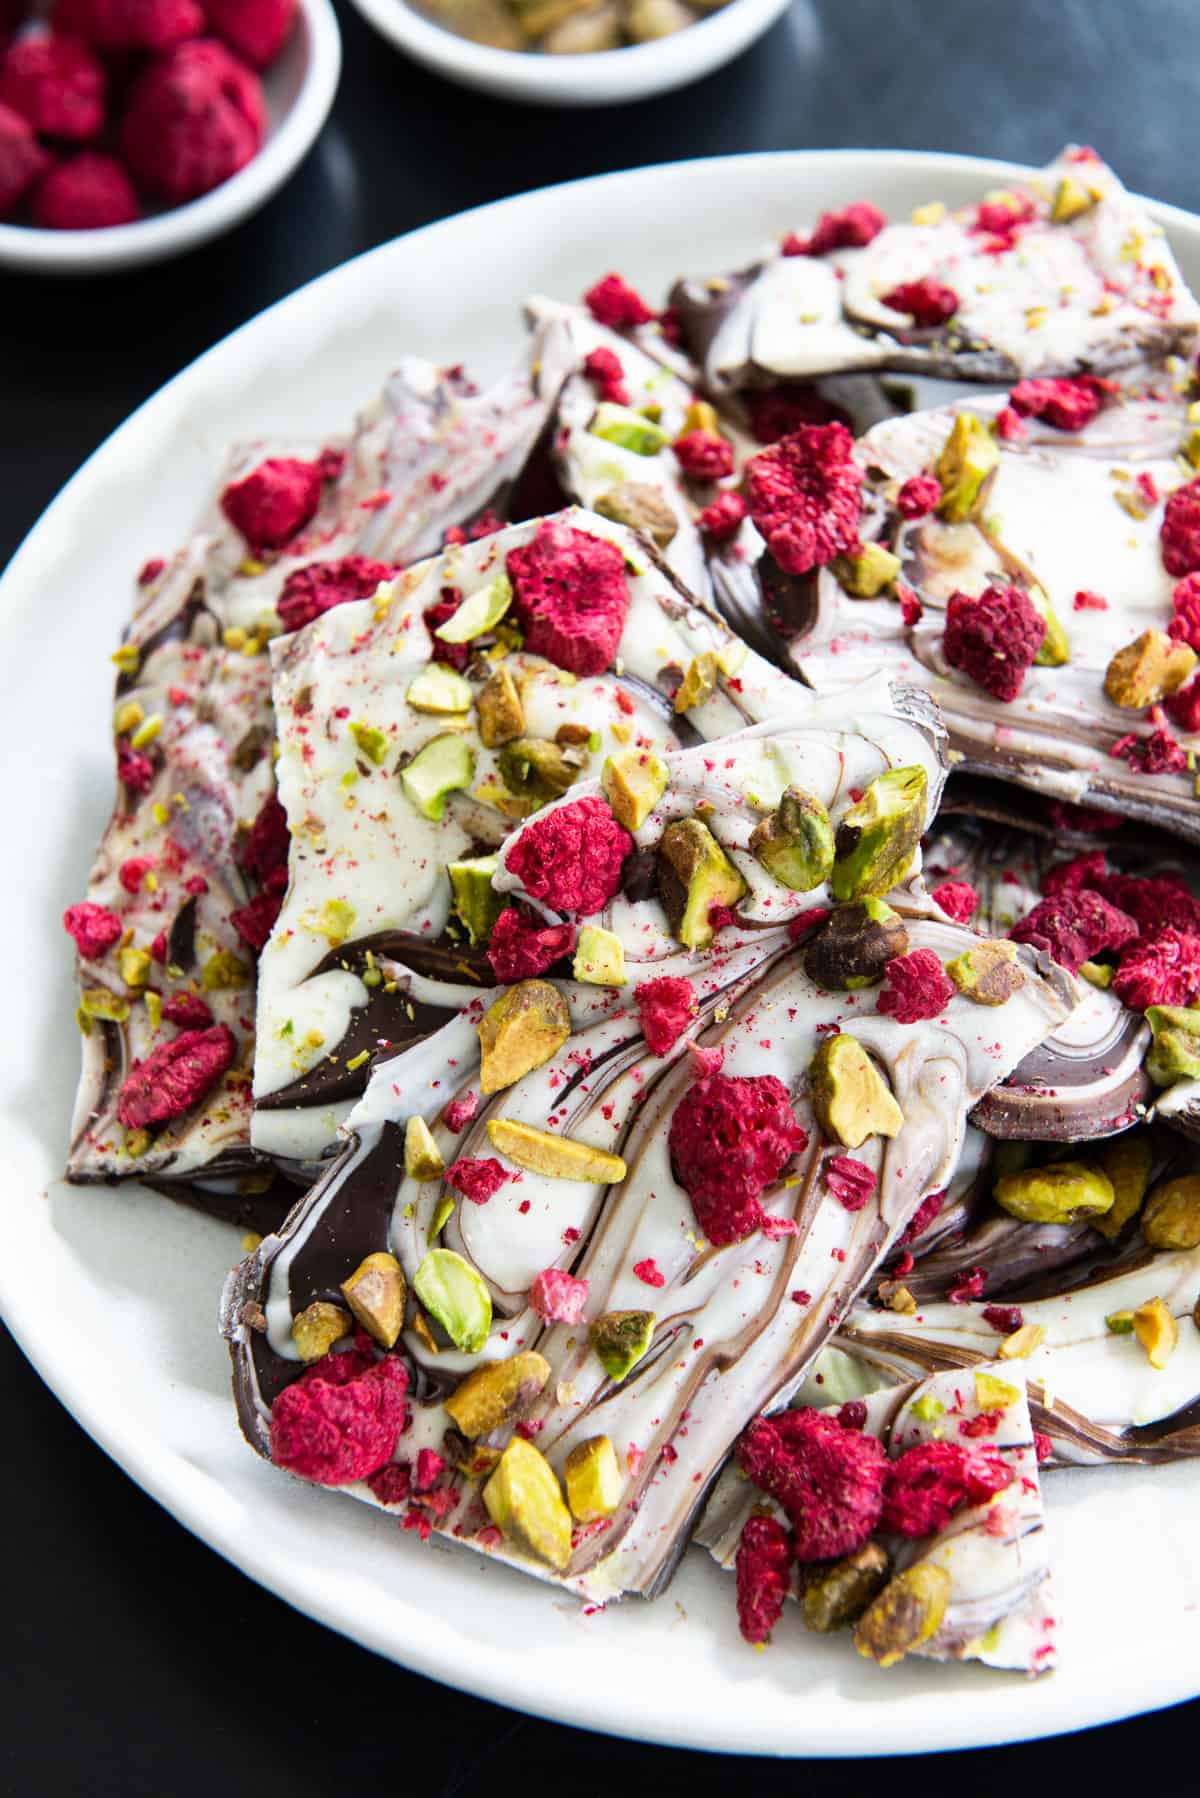 Chocolate Bark with Raspberries and Pistachios On Plate